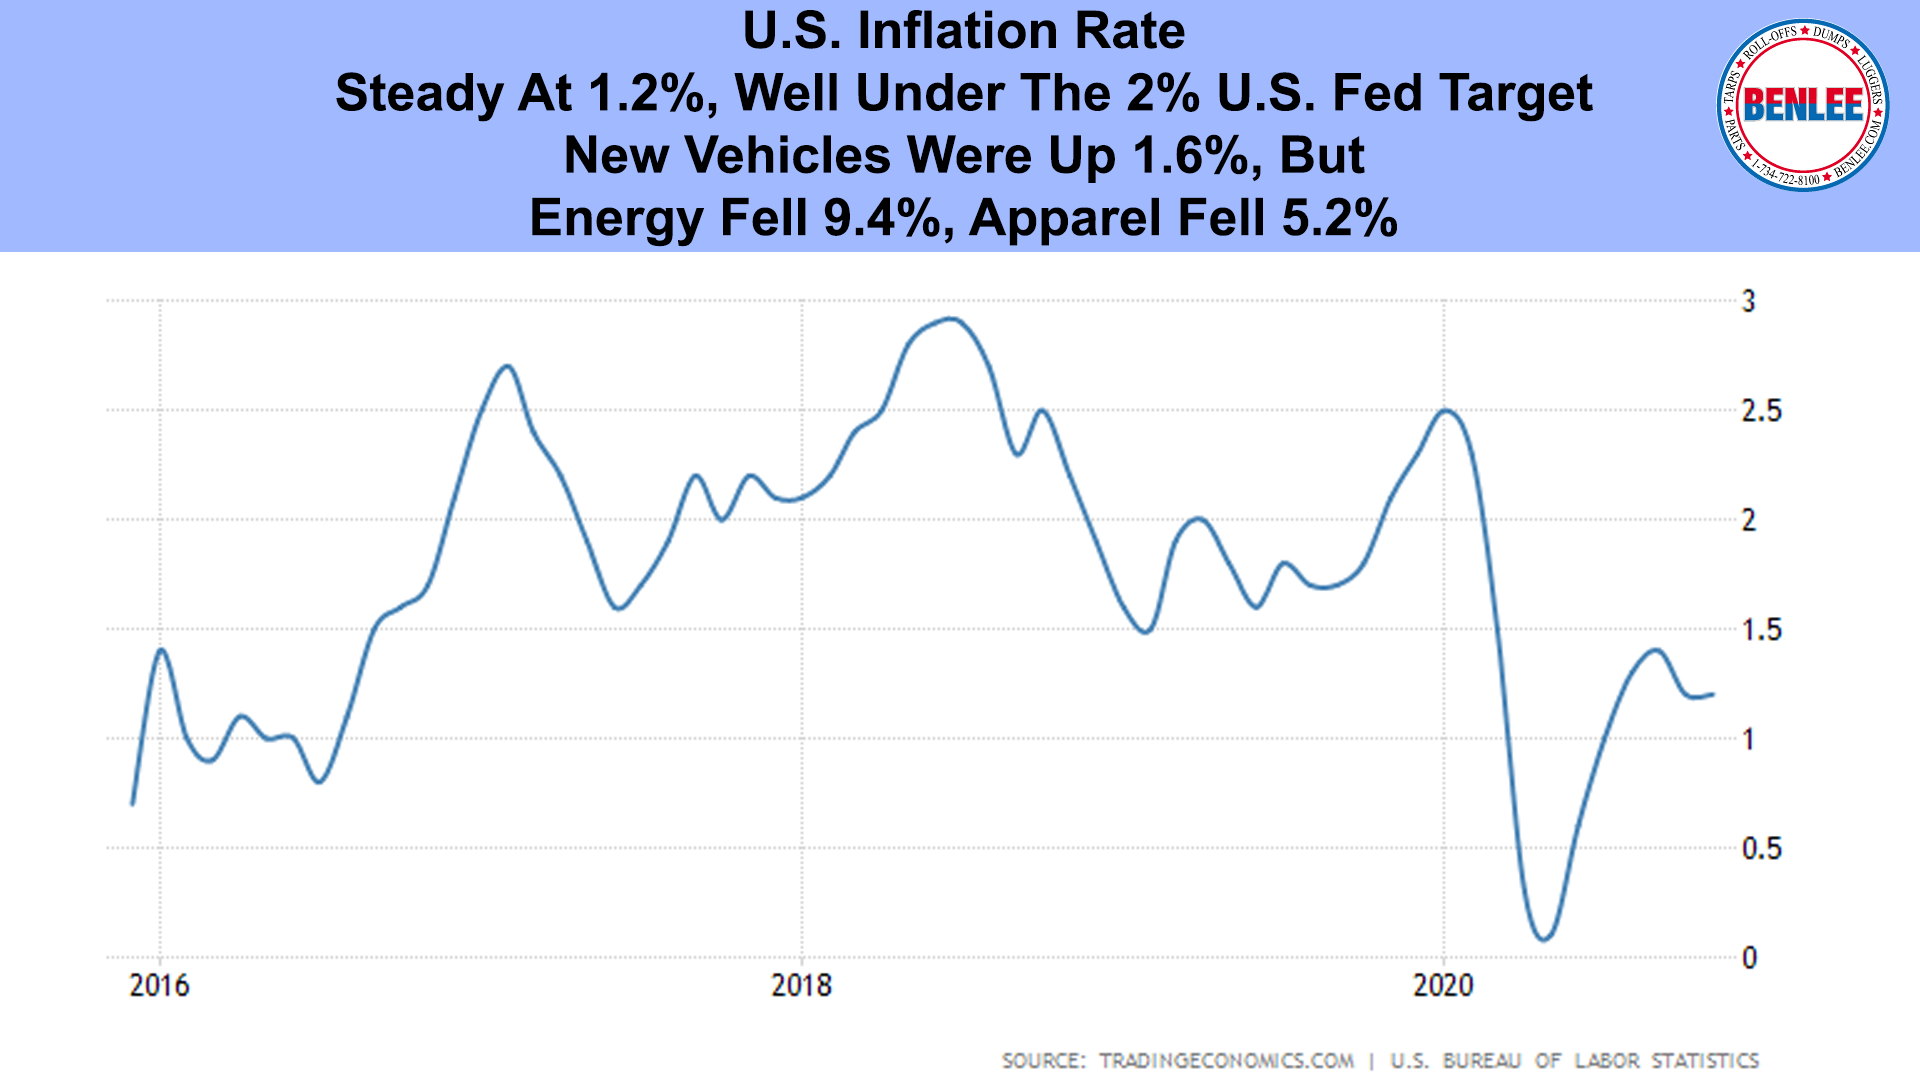 U.S. Inflation Rate